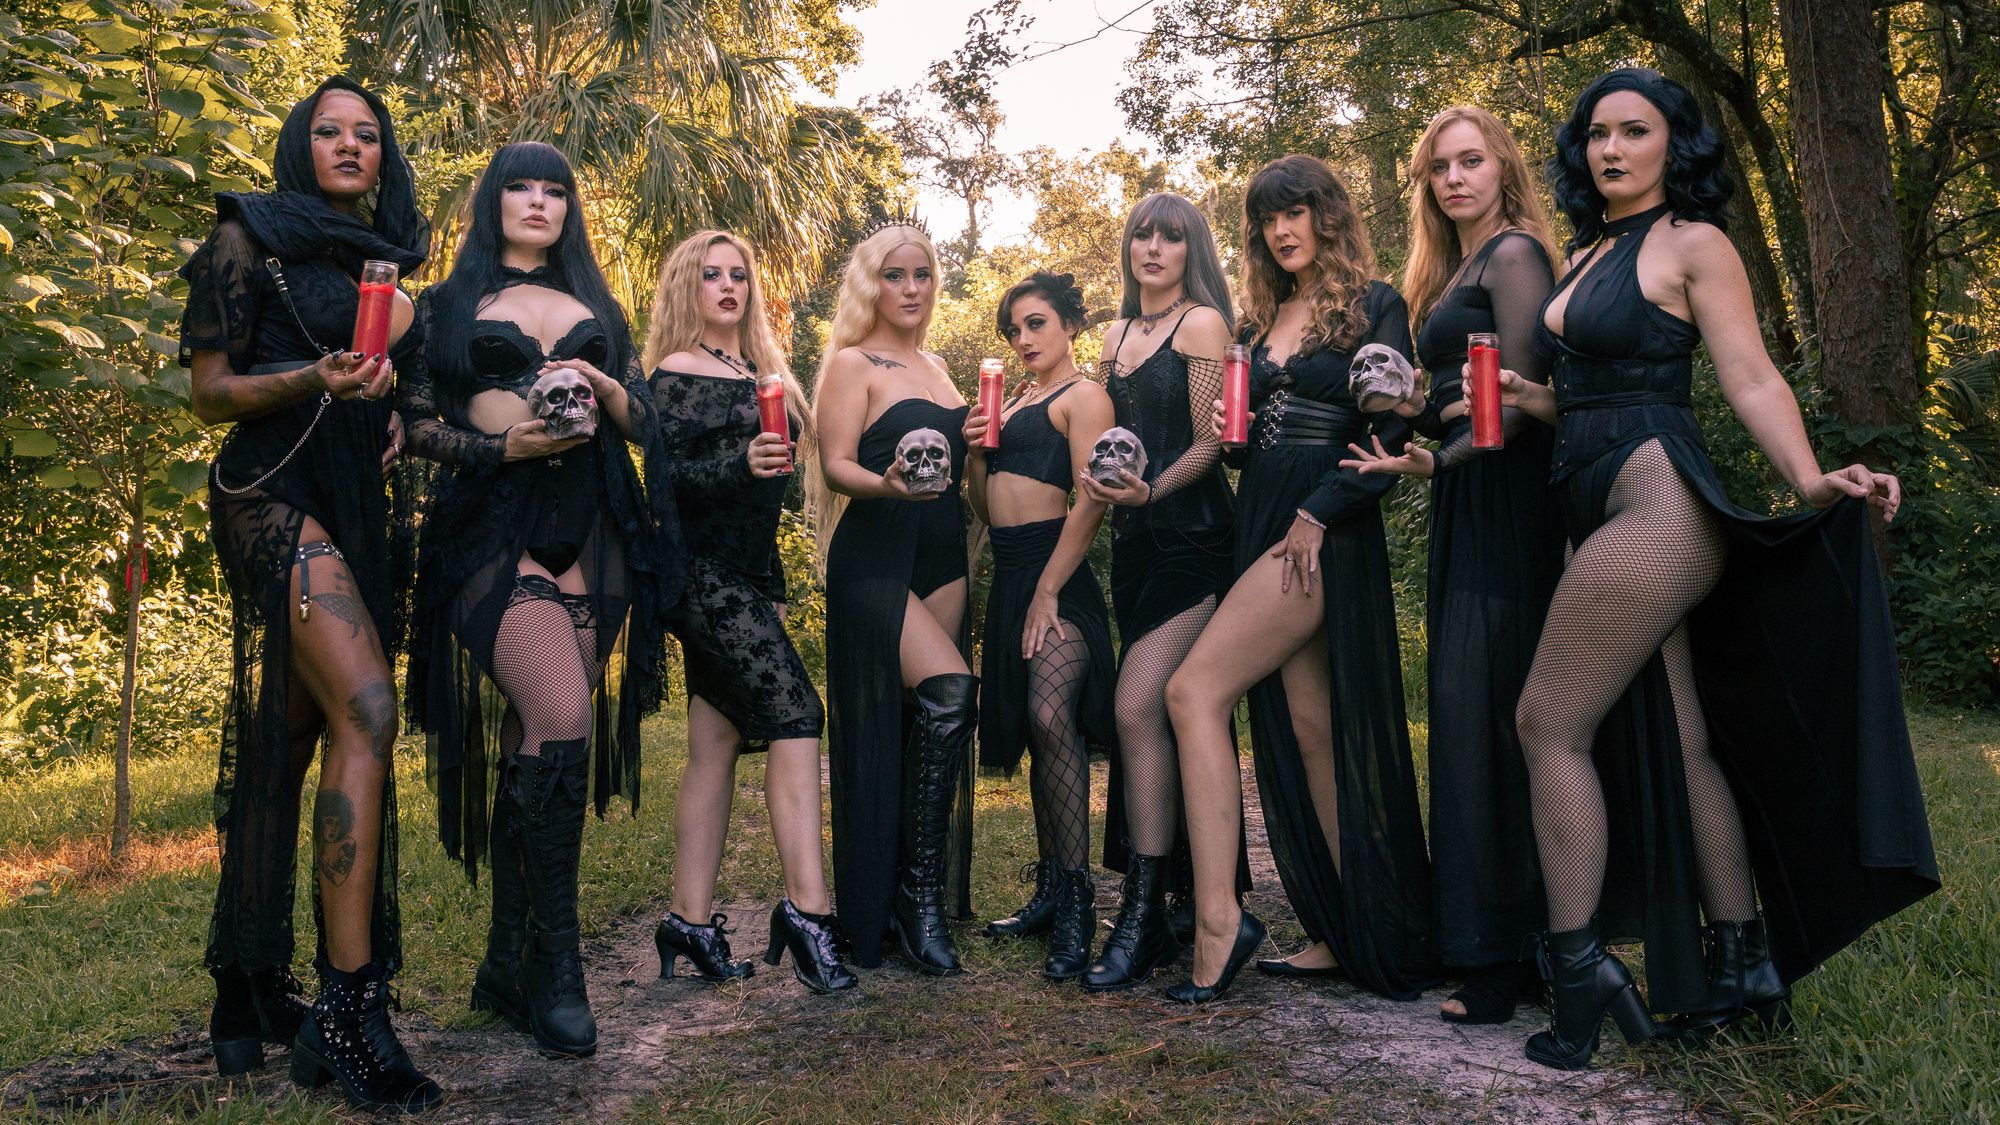 Heart Pumping Rock & Metal Music - Bad Witch Burlesque